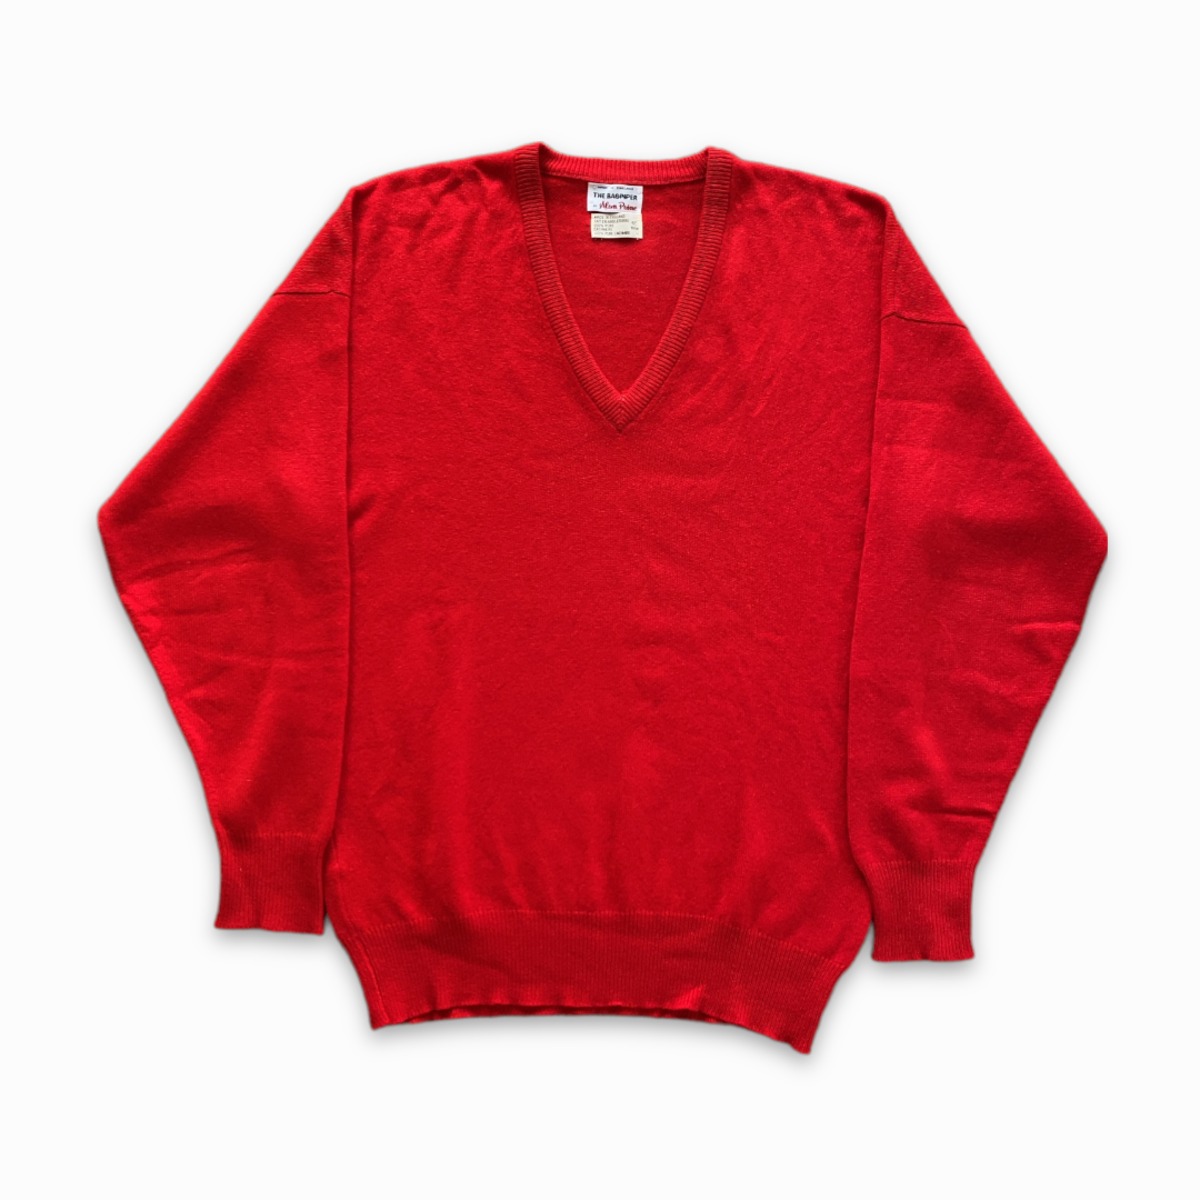 Alan Paine / 70-80's Vneck Cashmere Sweater / Made in England